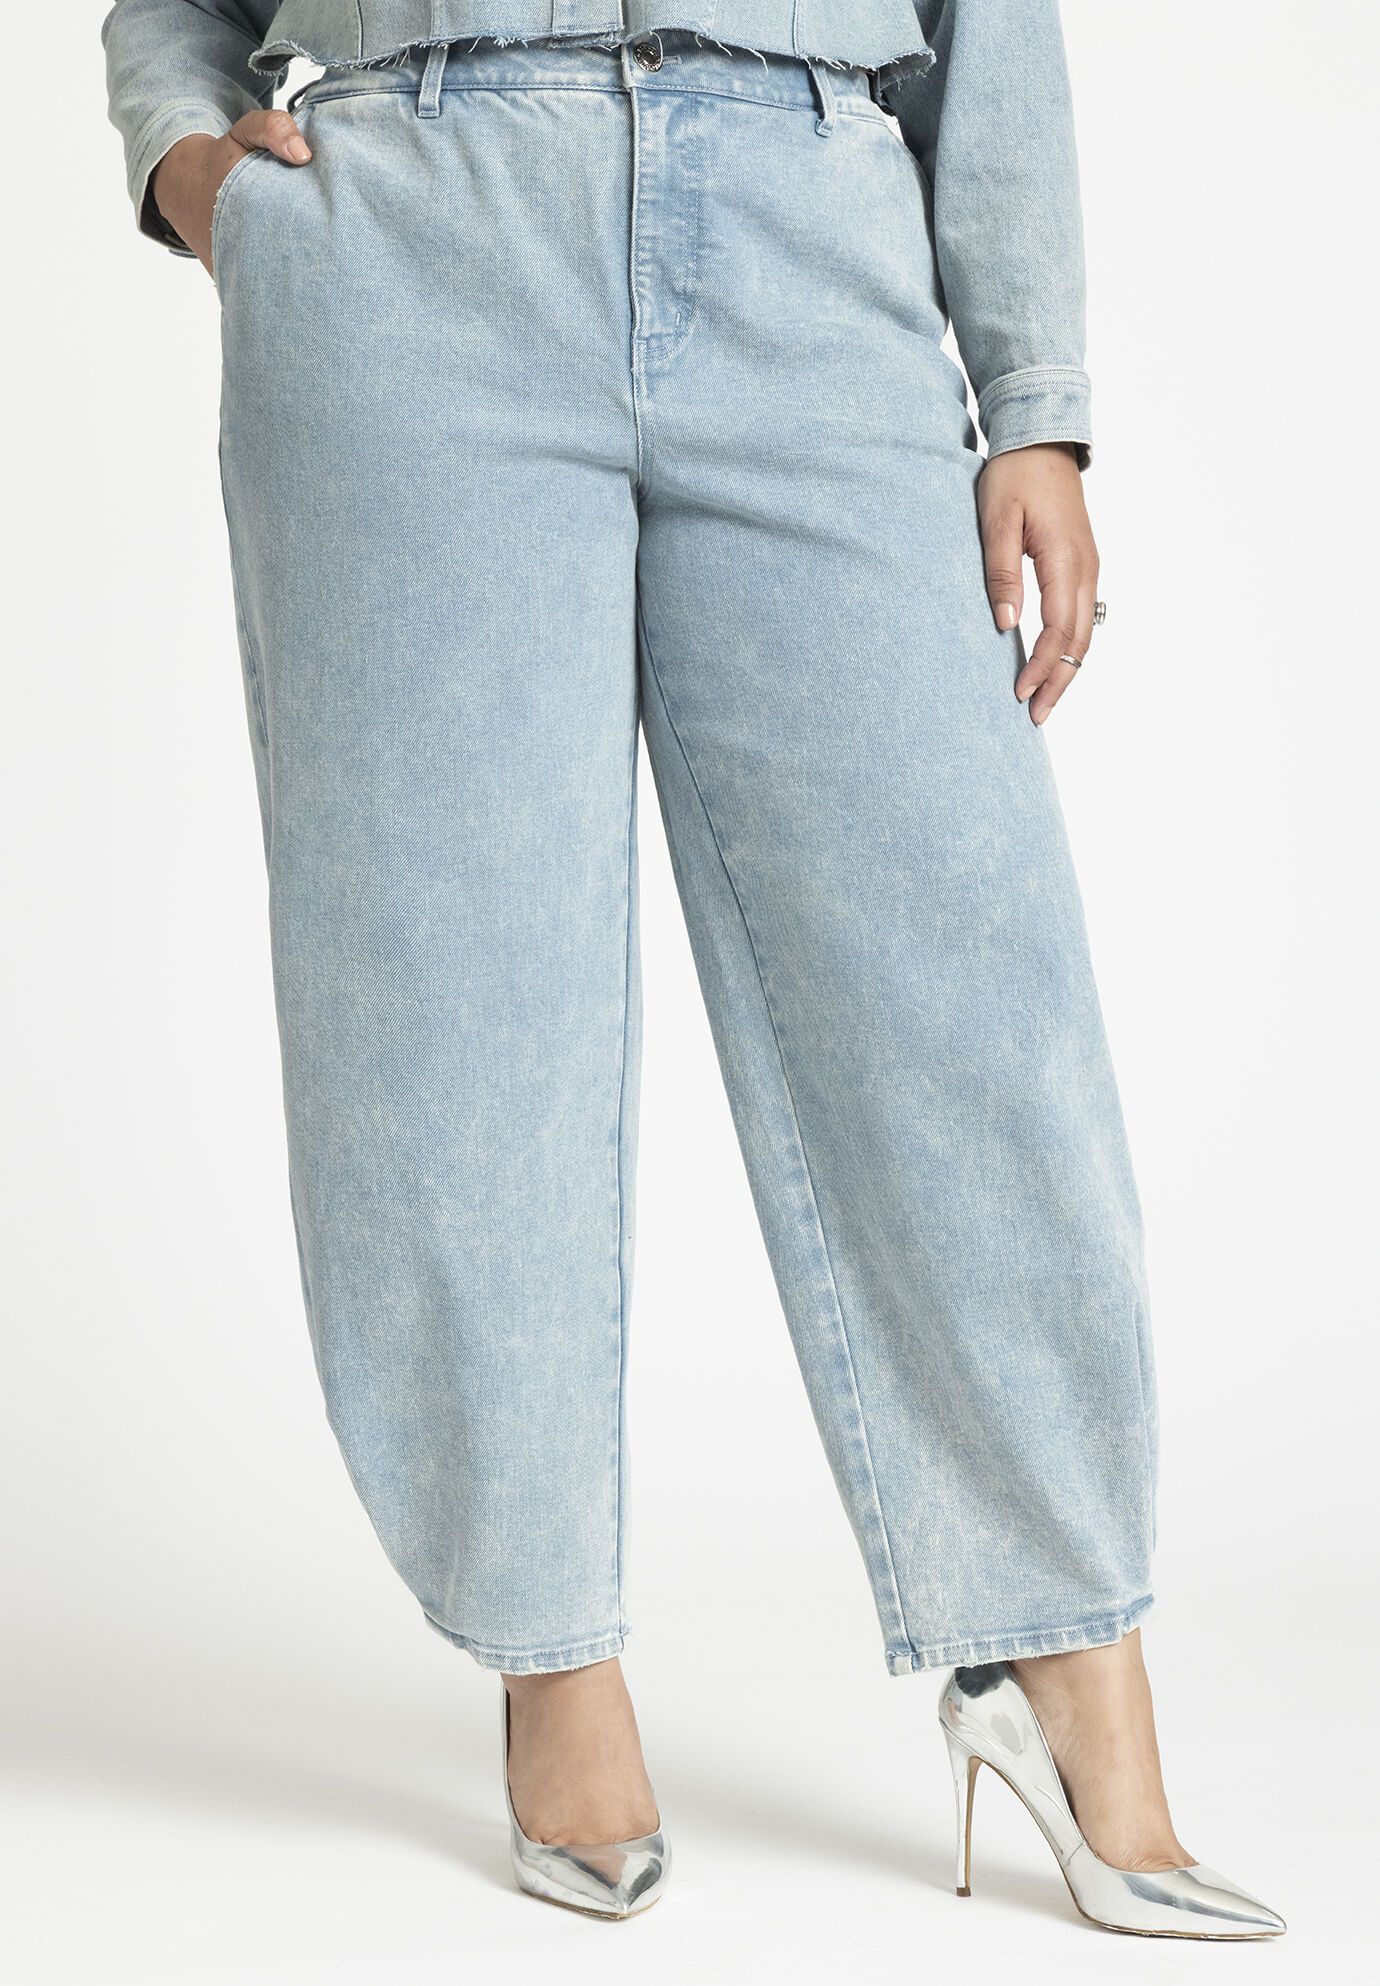 Slouchy Distressed Jean | Eloquii